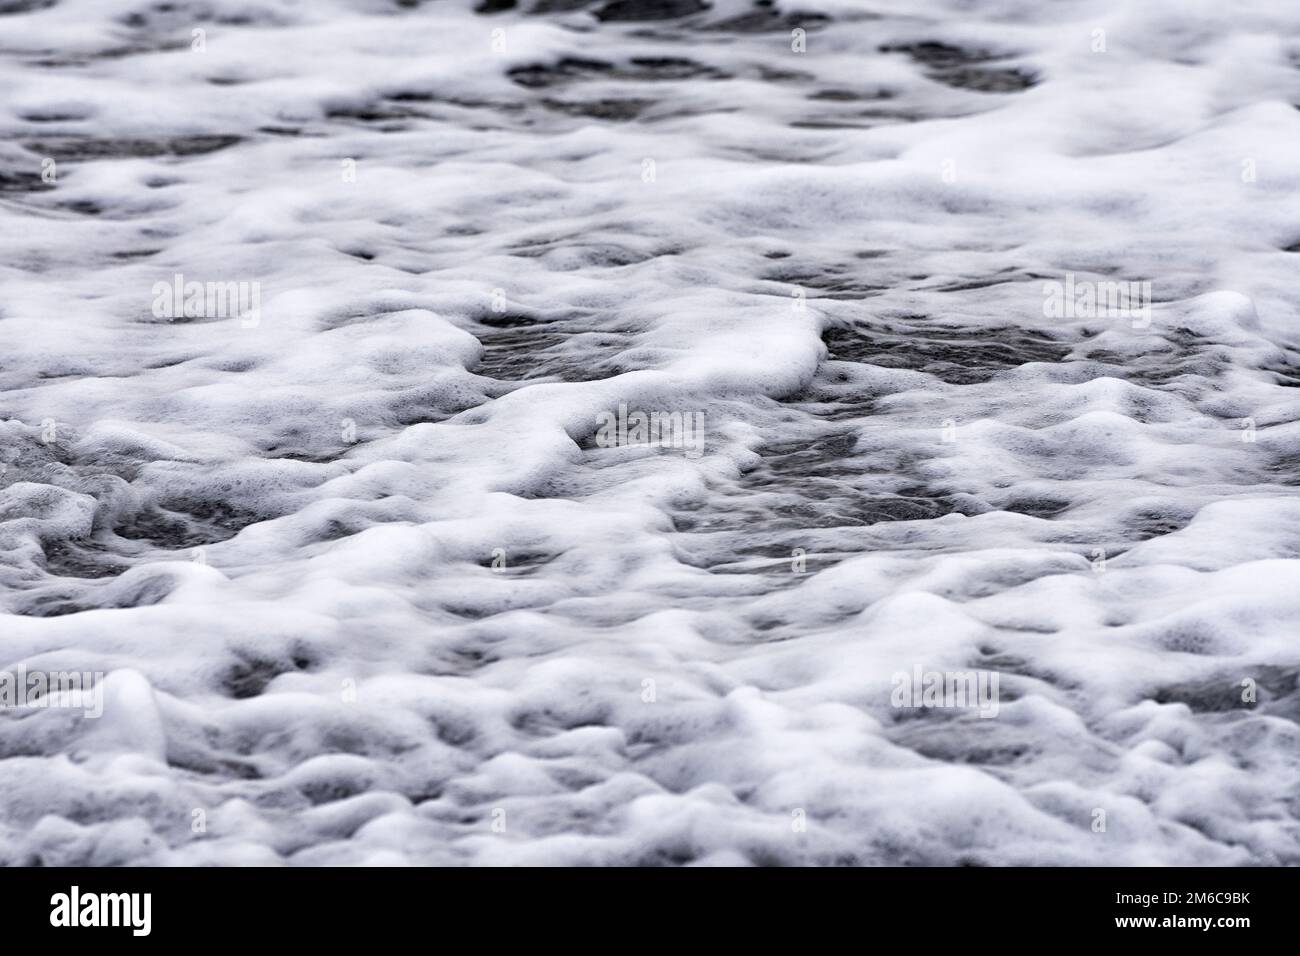 Natural sea water pattern. Foamy water runs out on a beach at wintertime. Small waves with whitecaps. Baltic Sea, Mecklenburg-Vorpommern, Germany Stock Photo